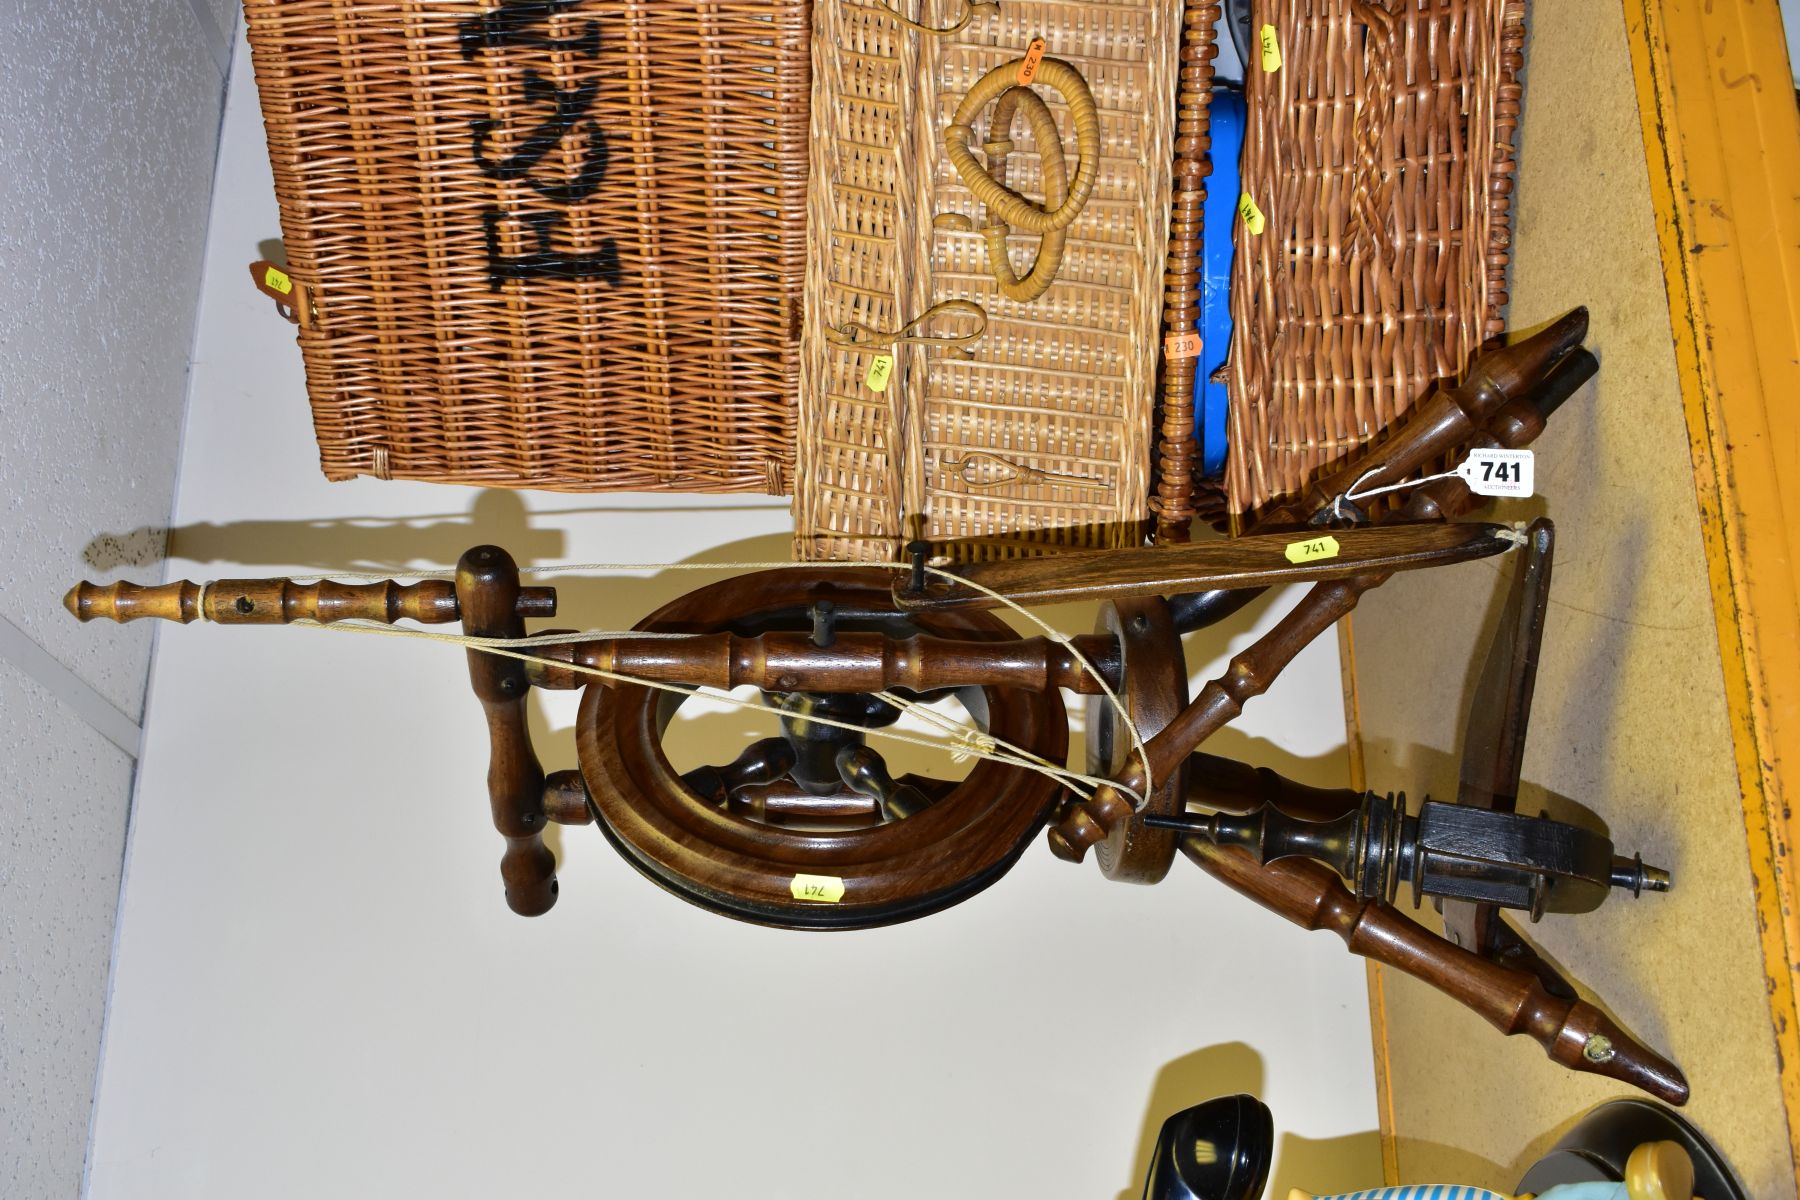 A FORTNUM & MASON PICNIC BASKET 34CM X 50CM AND TWO OTHER WICKER PICNIC BASKETS, also an